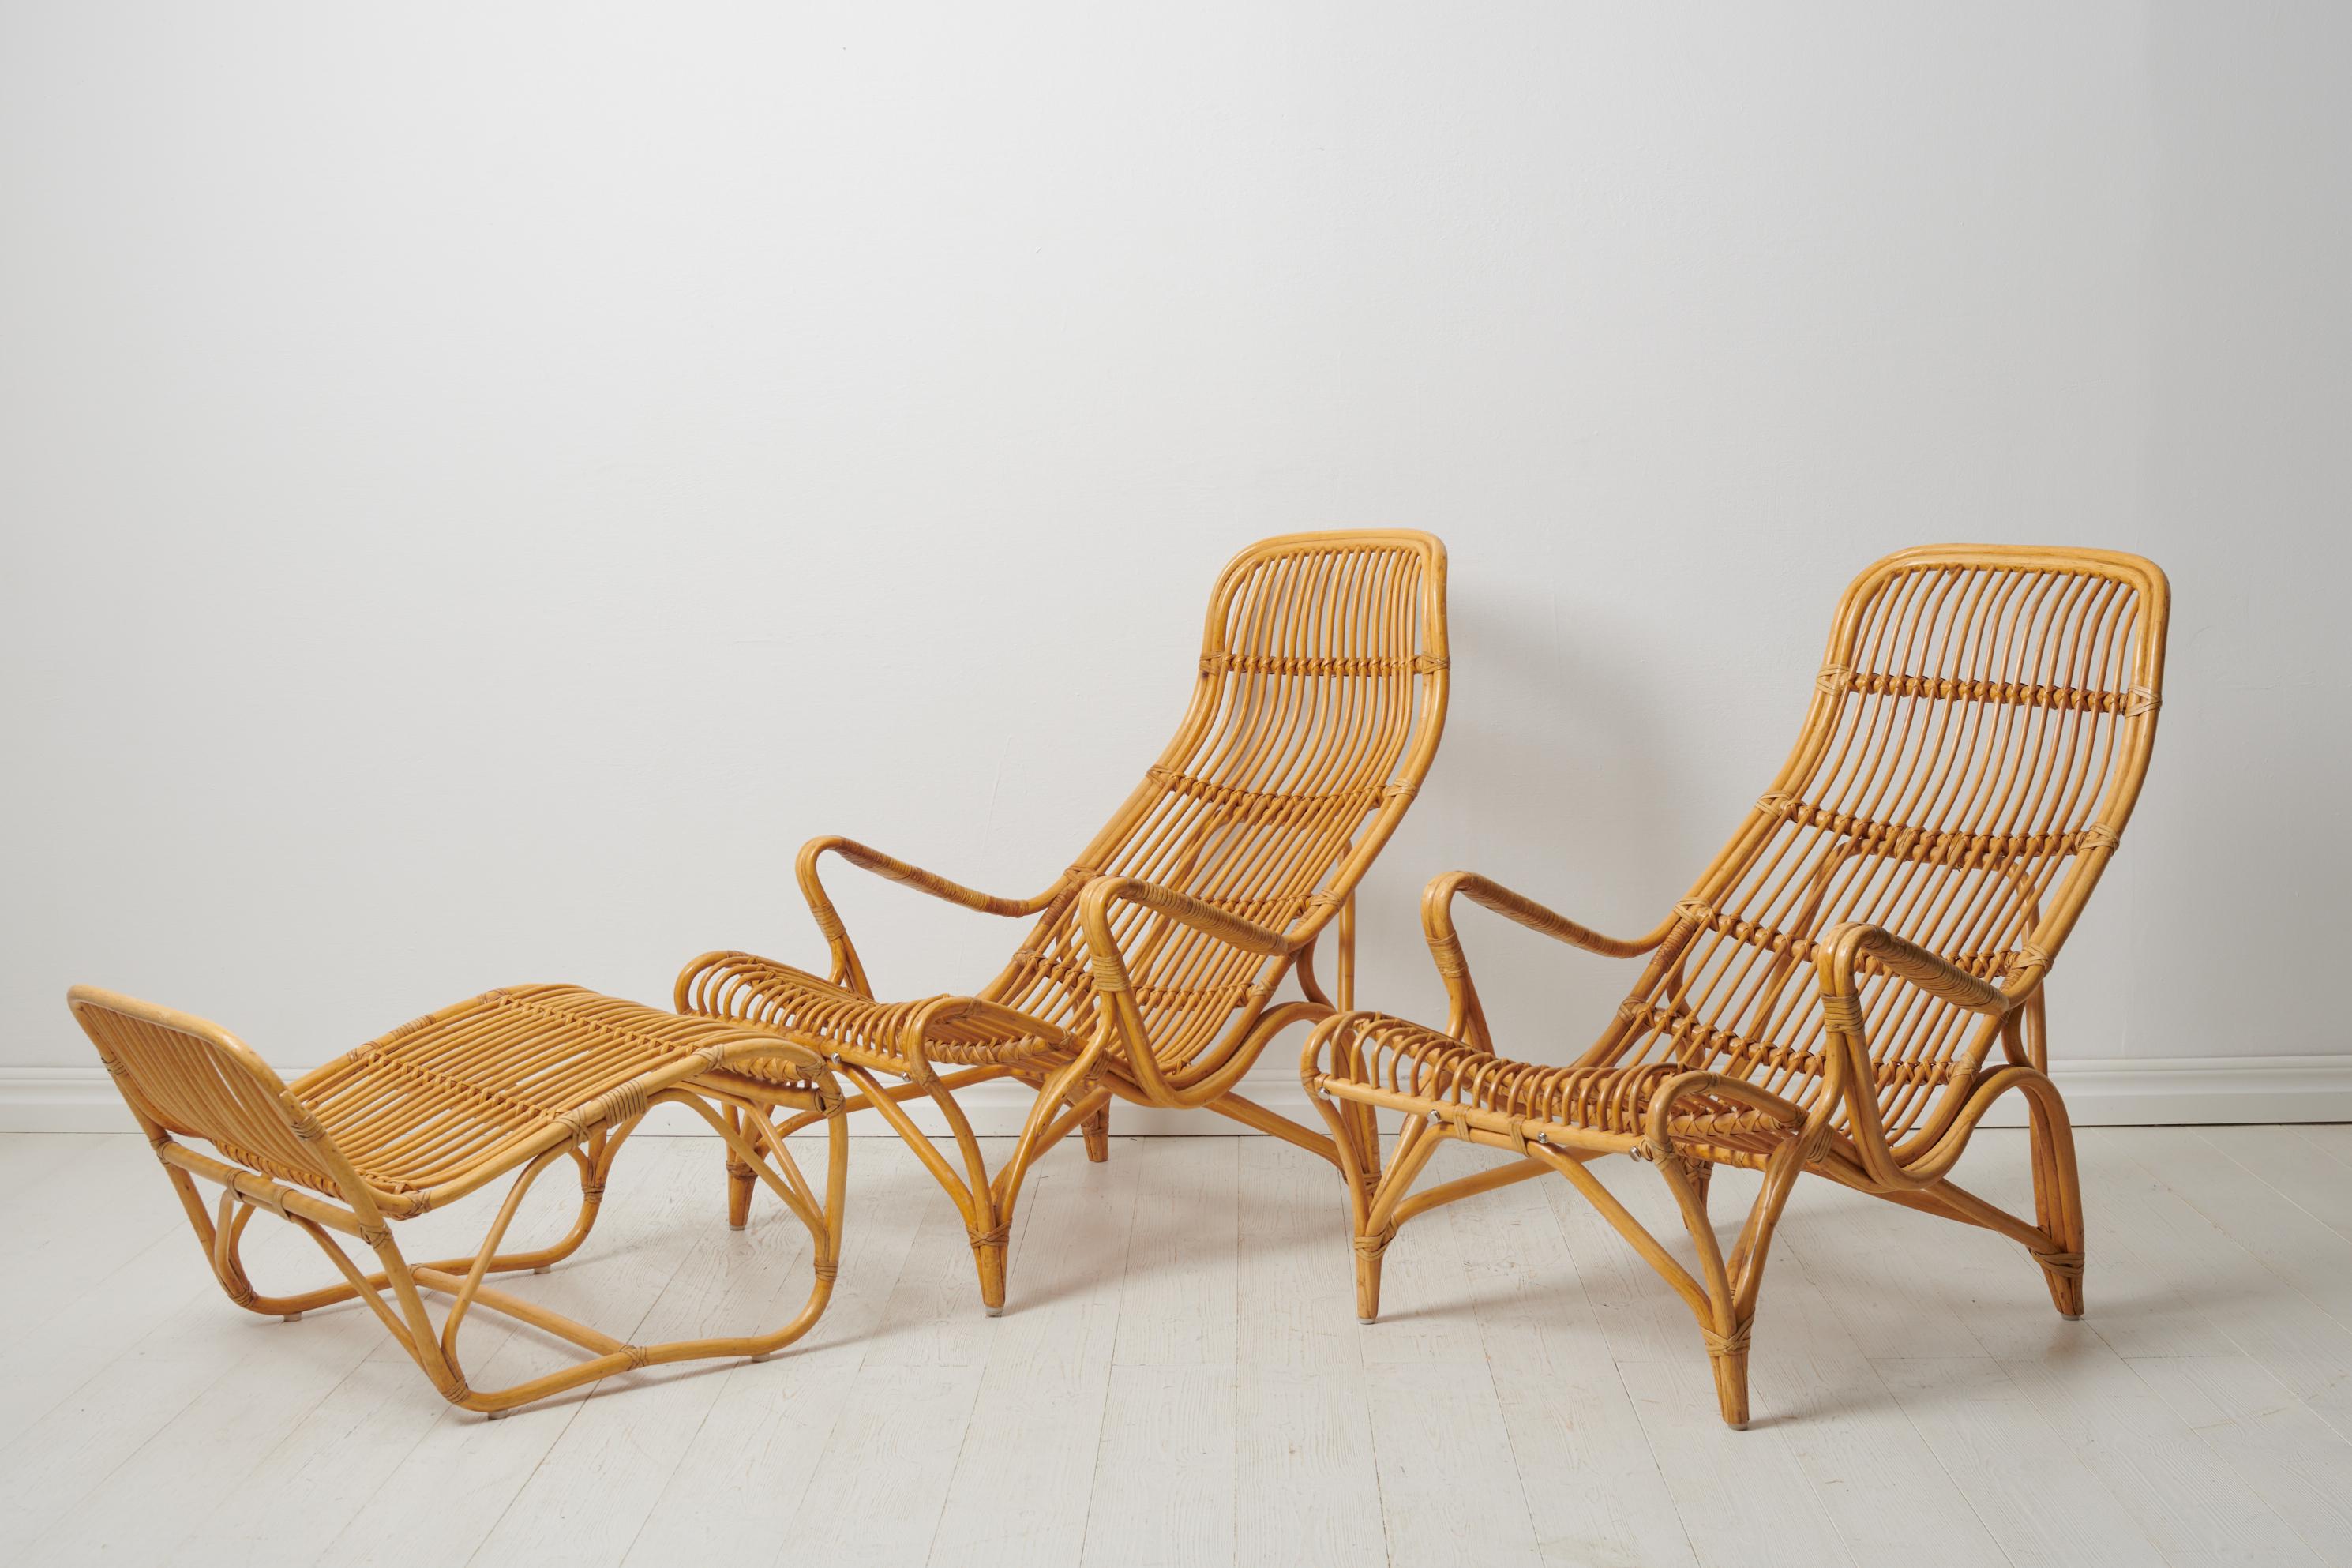 Lounge chairs by Bruno Mathsson in rattan. Indulge in luxury with this pair of iconic lounge chairs by Bruno Mathsson, a rare pair in rattan accompanied by a footstool for DUX. This model, with its distinctiveness, was only produced in limited